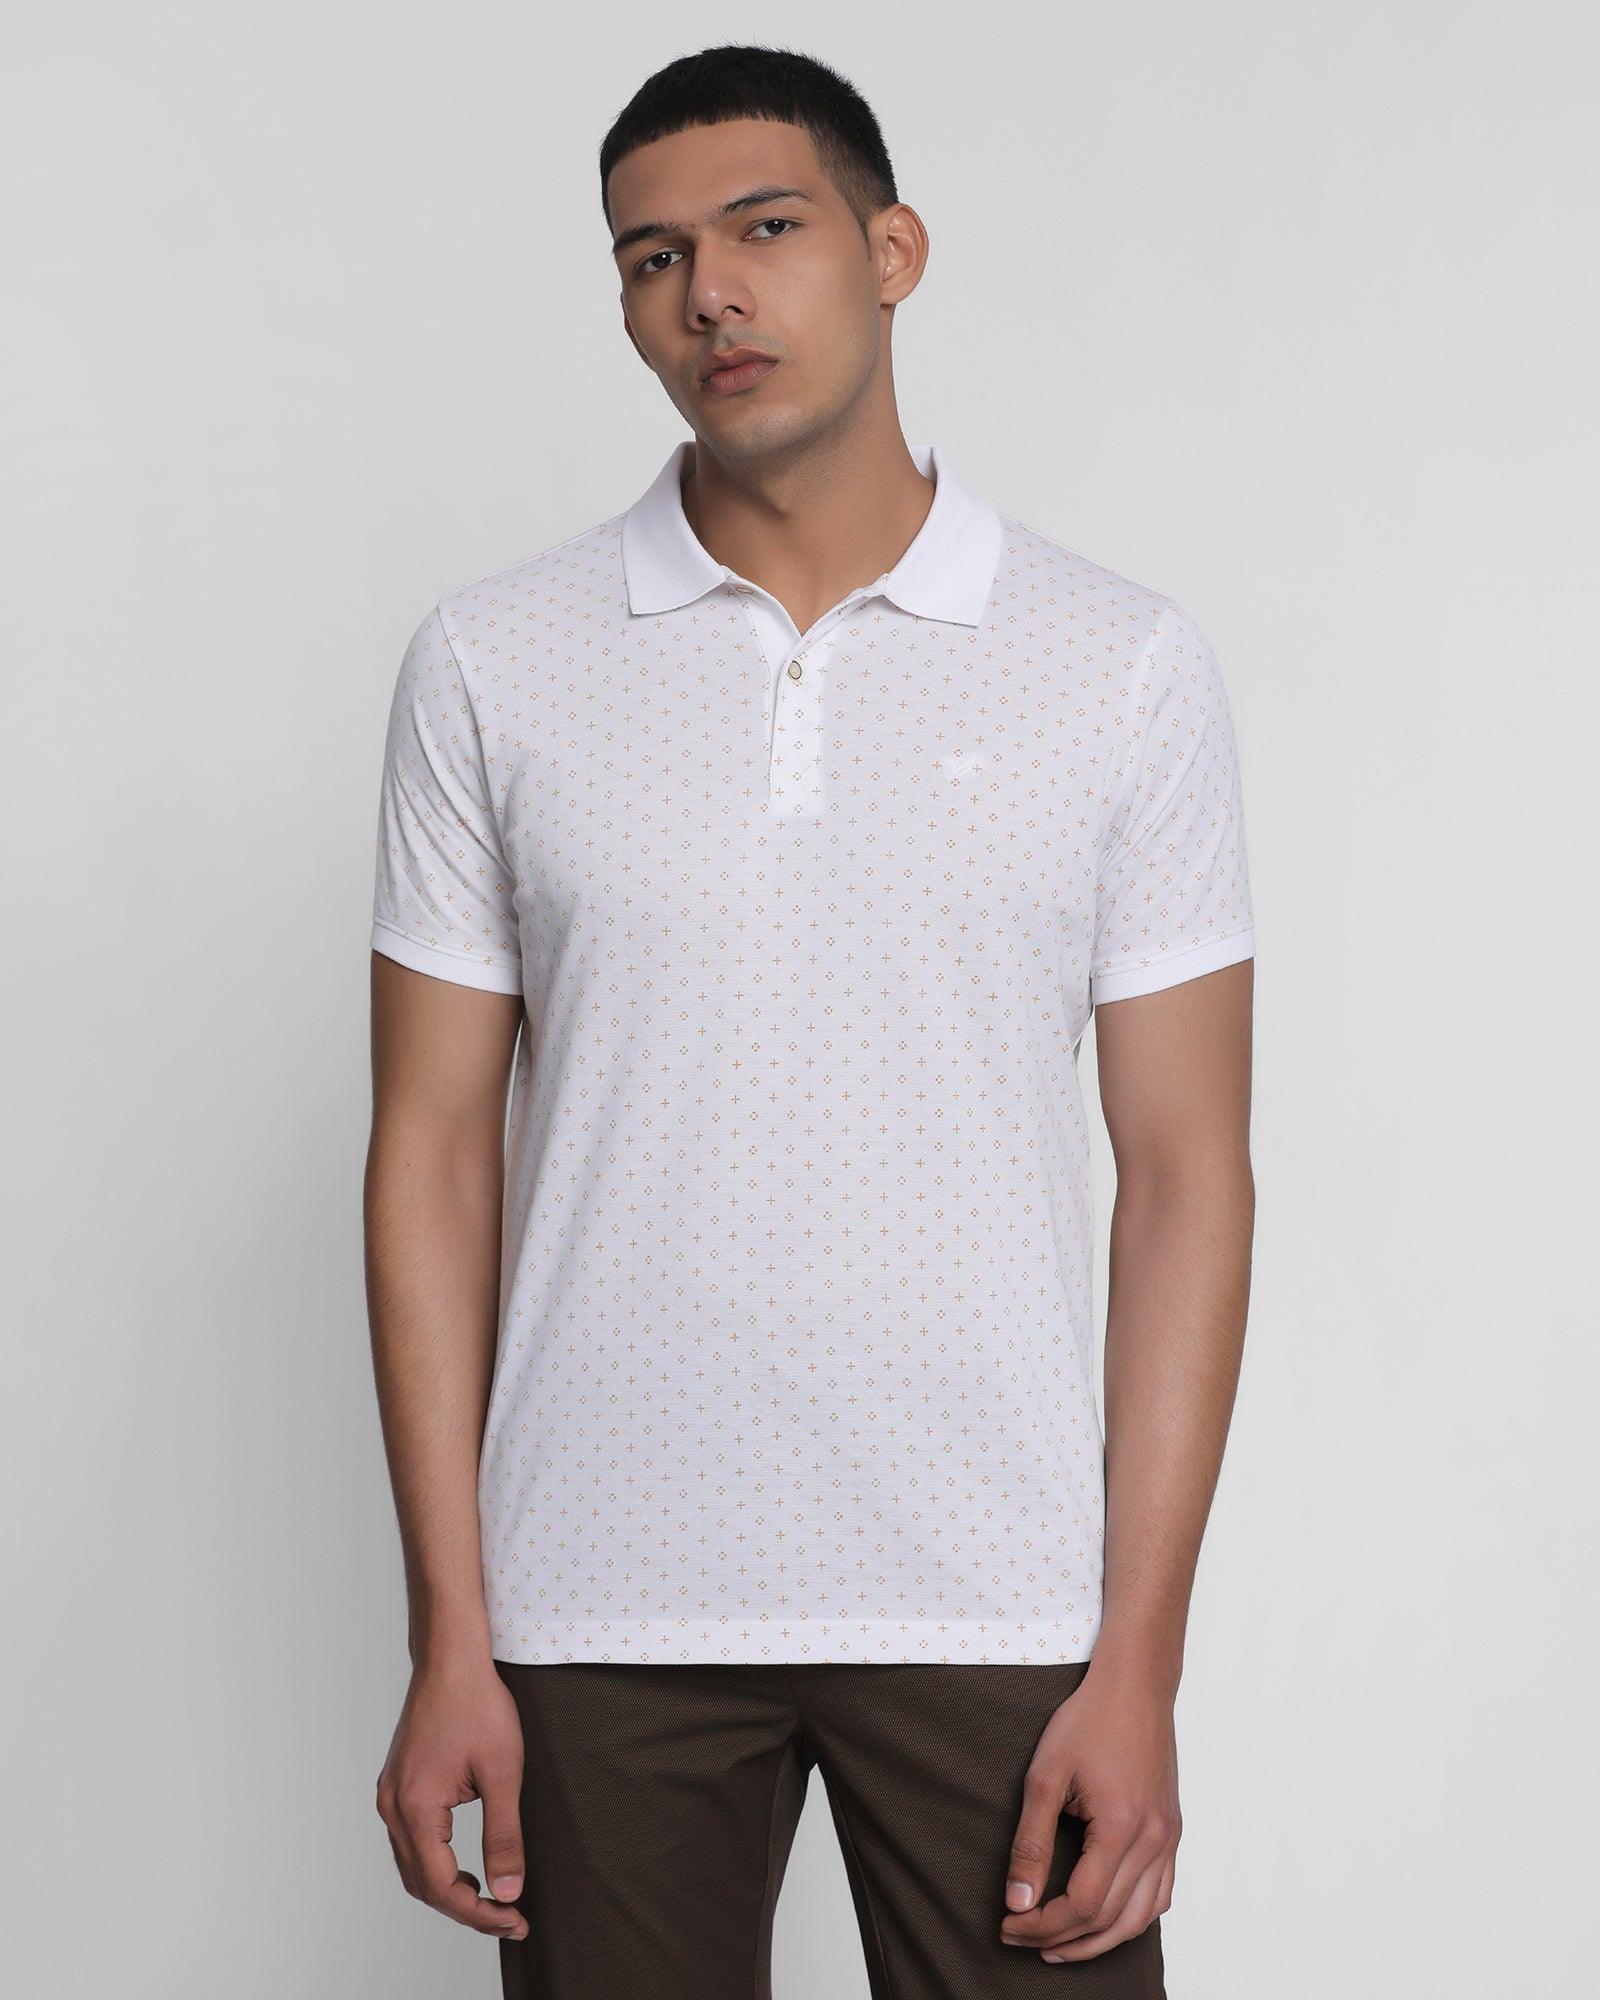 Polo White Printed T Shirt - Piculet